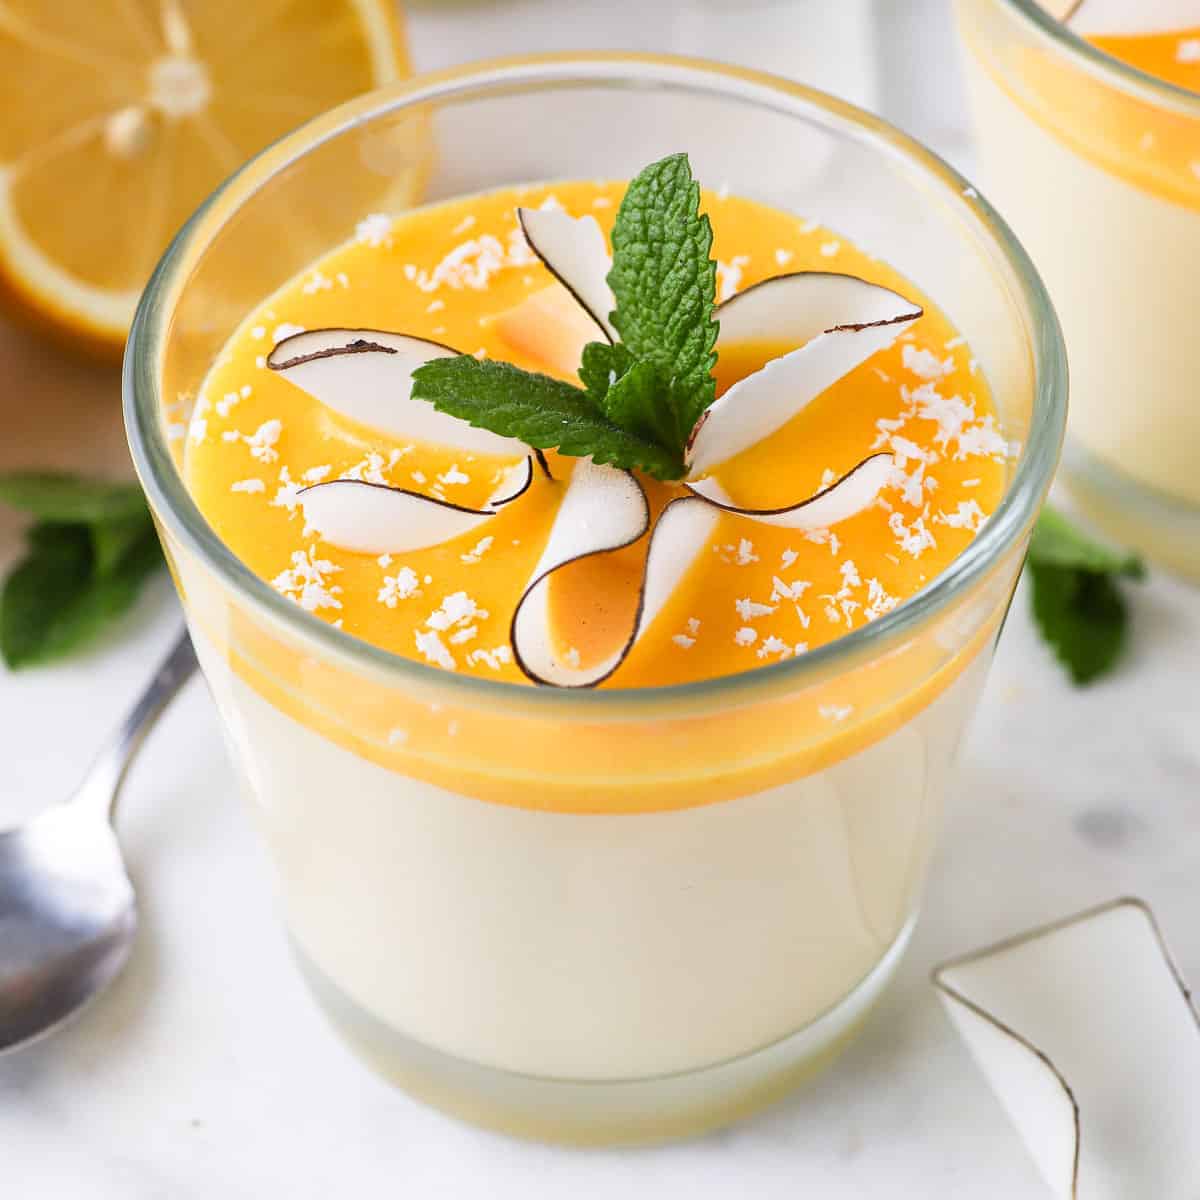 A close-up view of lemon mousse with lemon curd in a cup of glass.